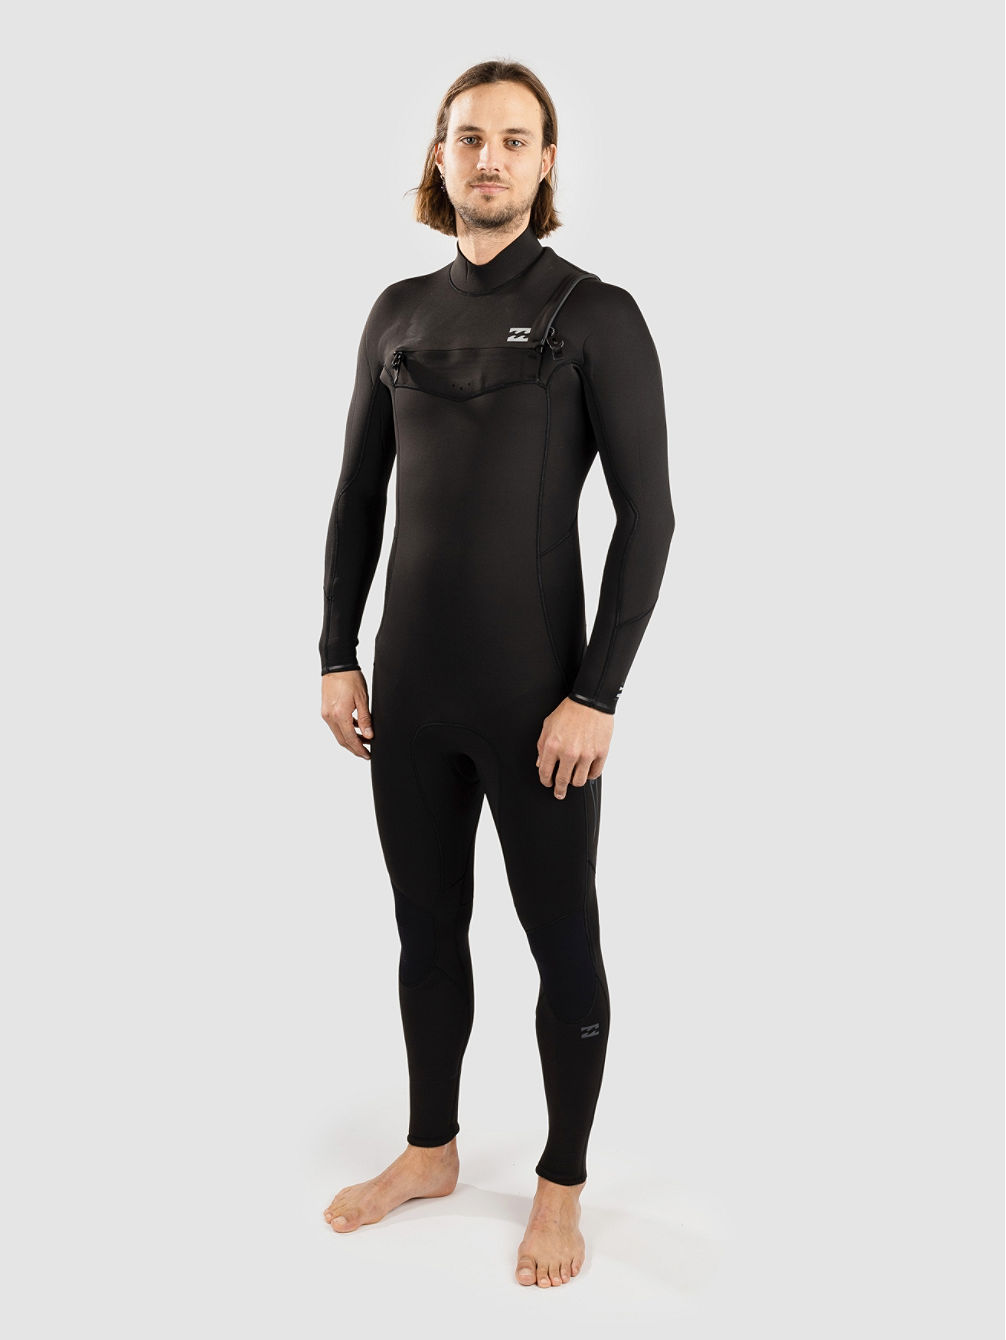 Absolute 4/3 Chest Zip Full GBS Wetsuit